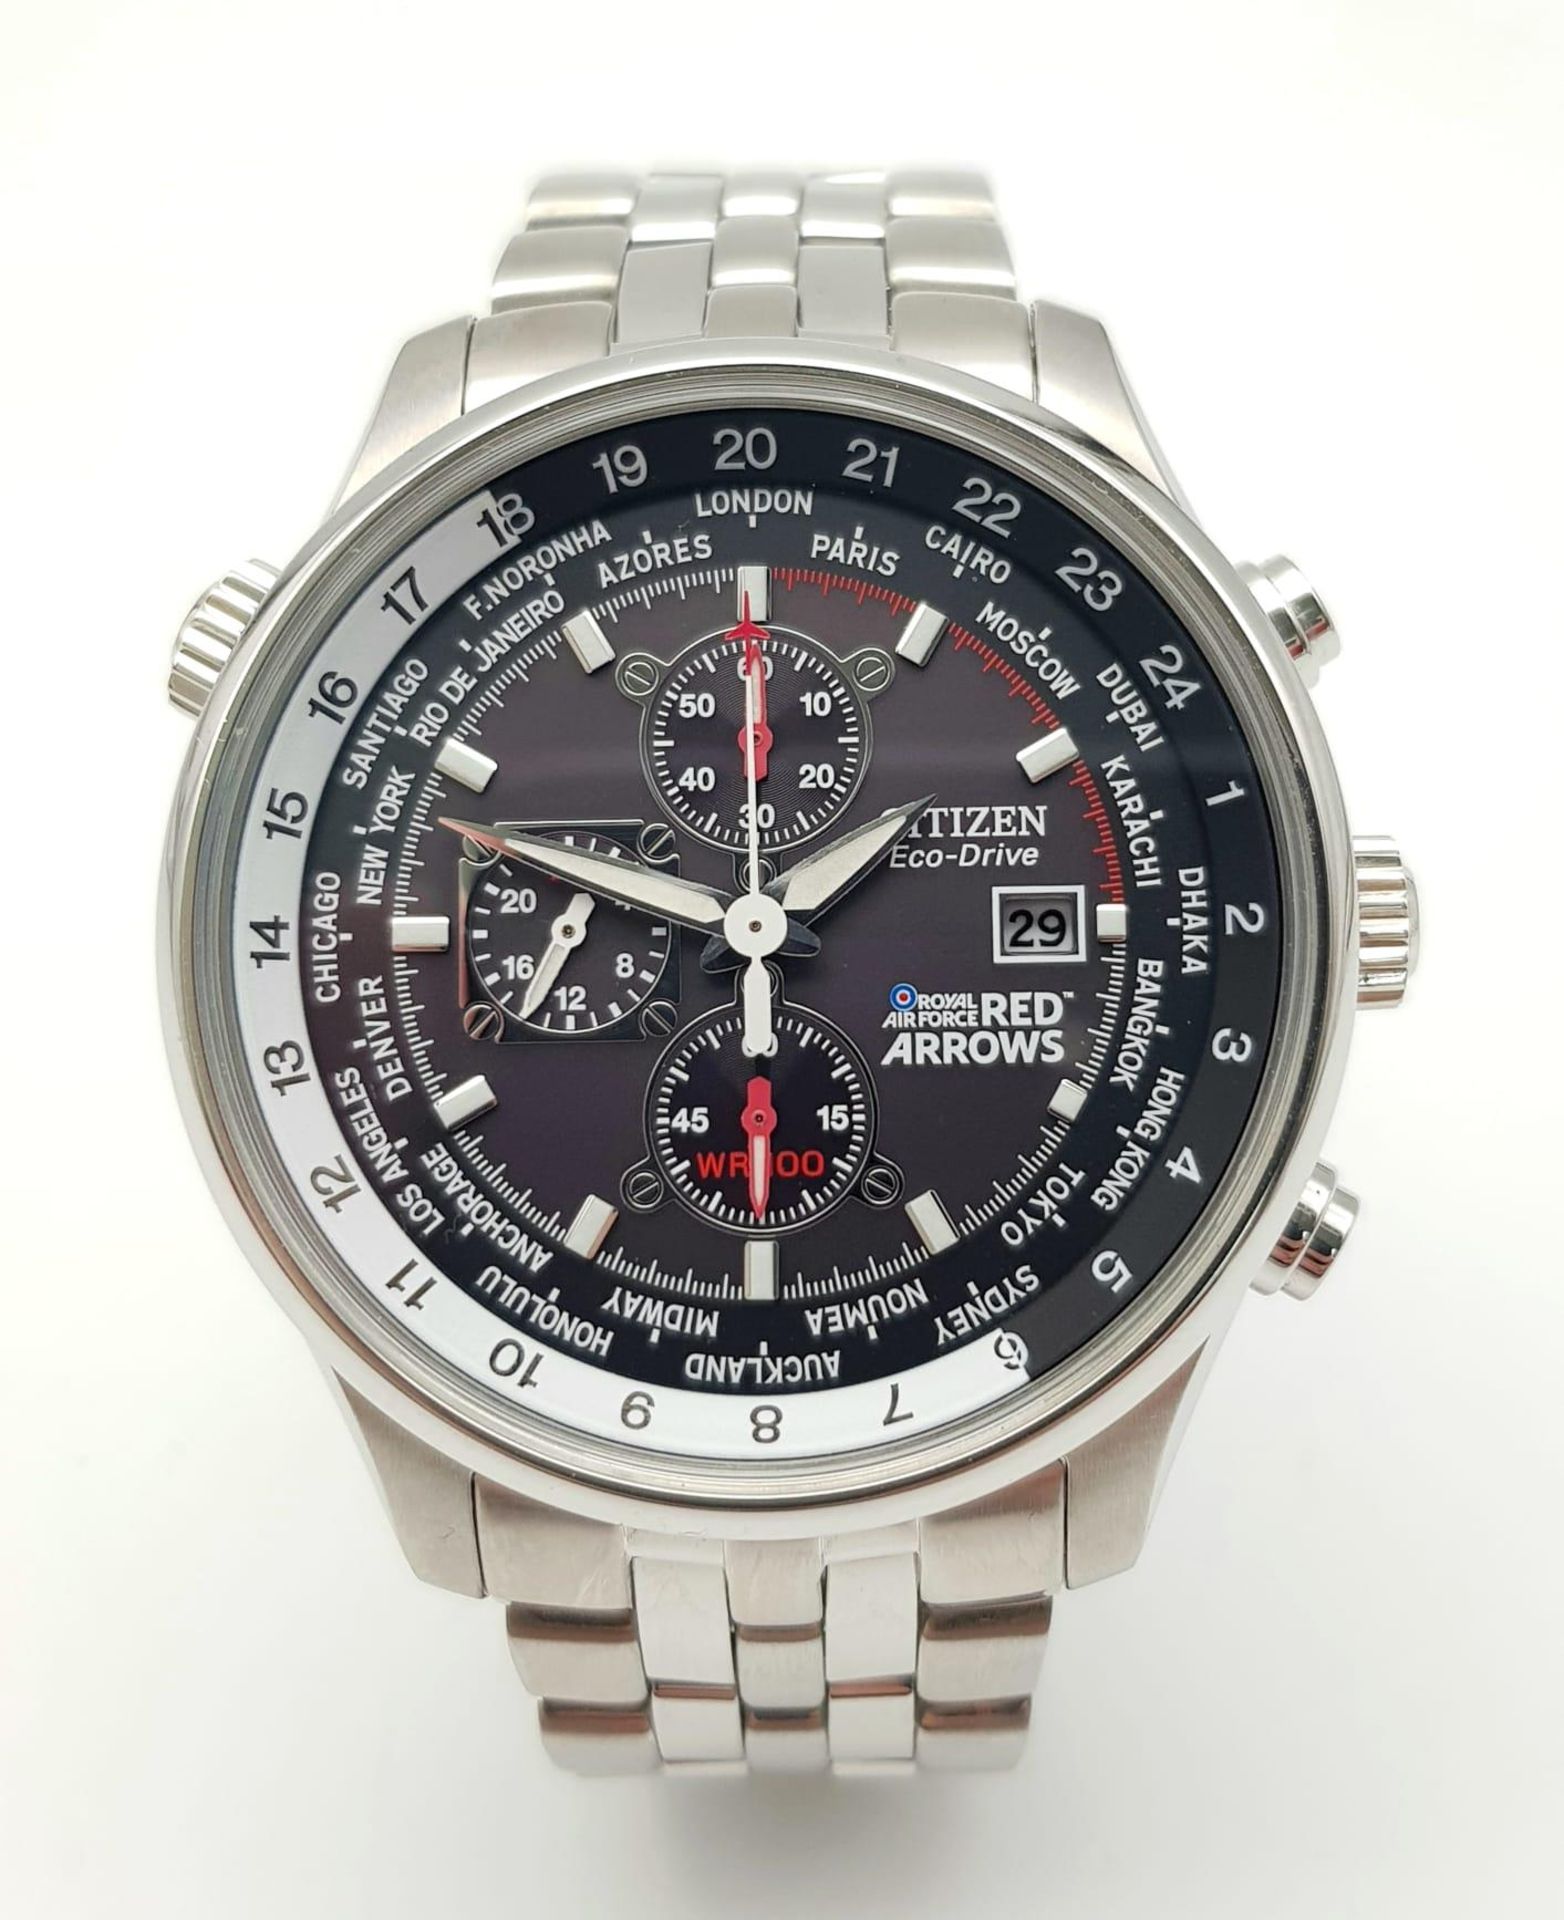 An Excellent Condition Citizen ‘Royal Air Force Red Arrows’ Eco Drive Chronograph Date Watch. 42mm